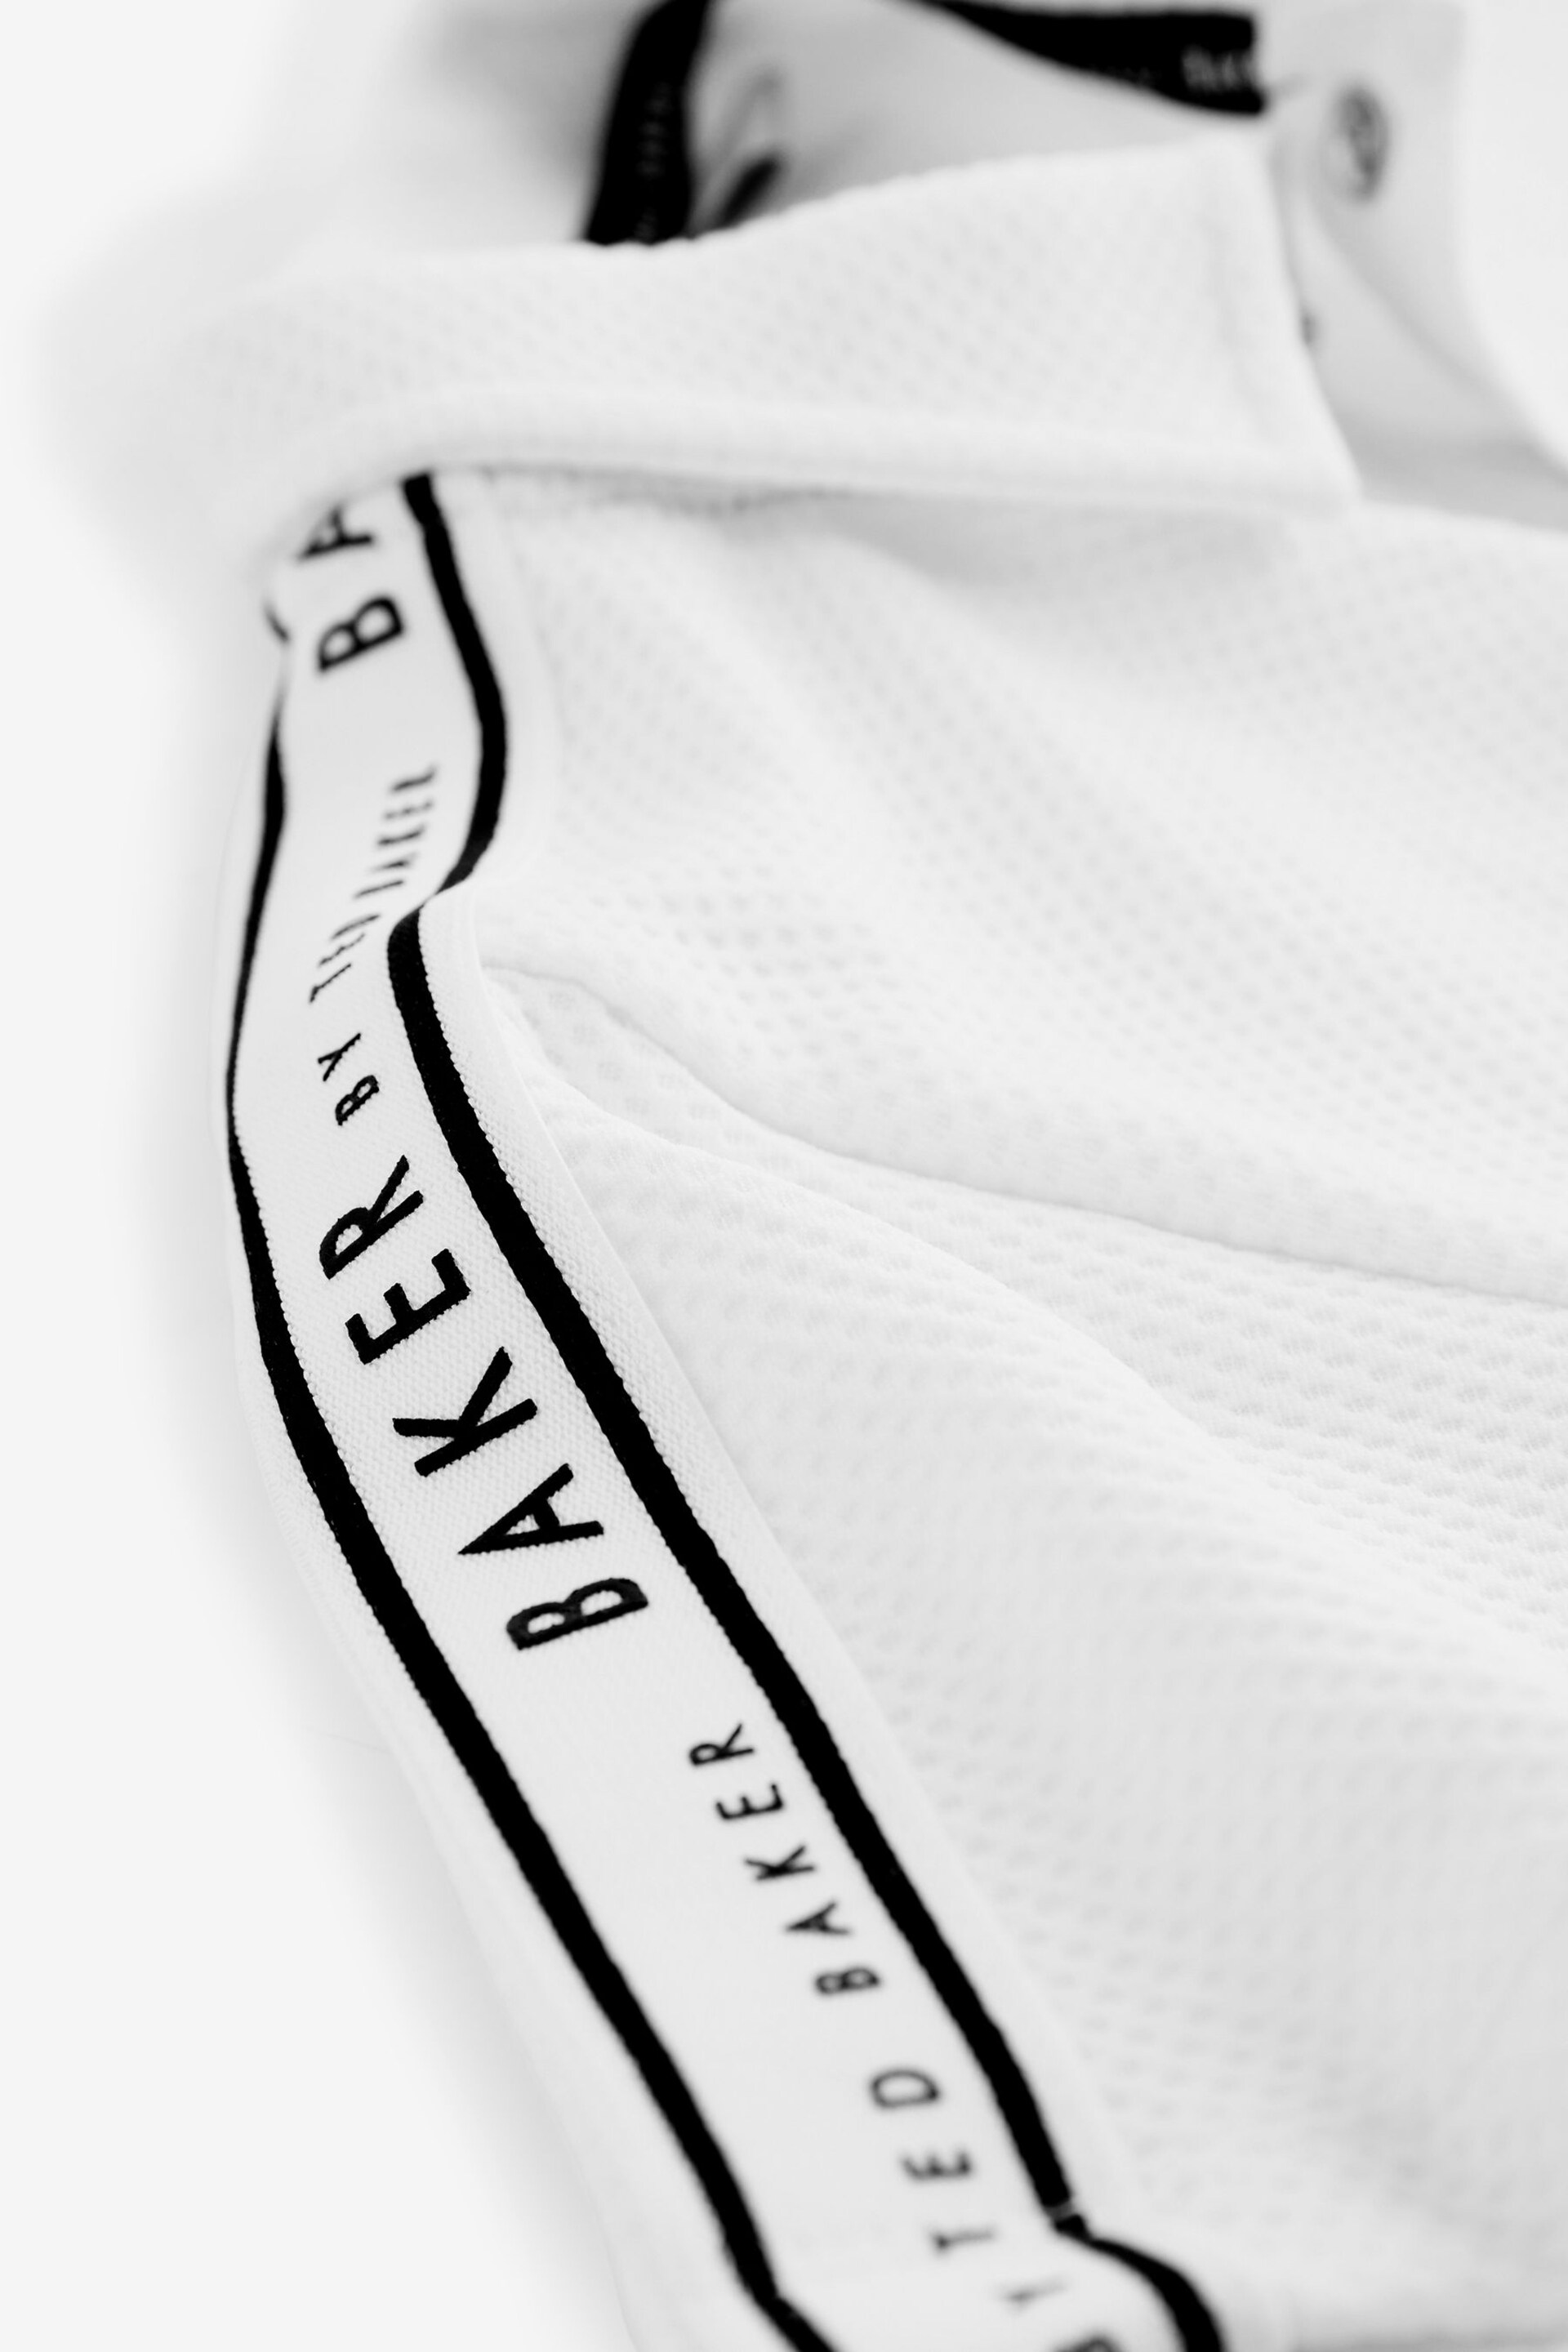 Baker by Ted Baker Textured White Polo Shirt - Image 10 of 10